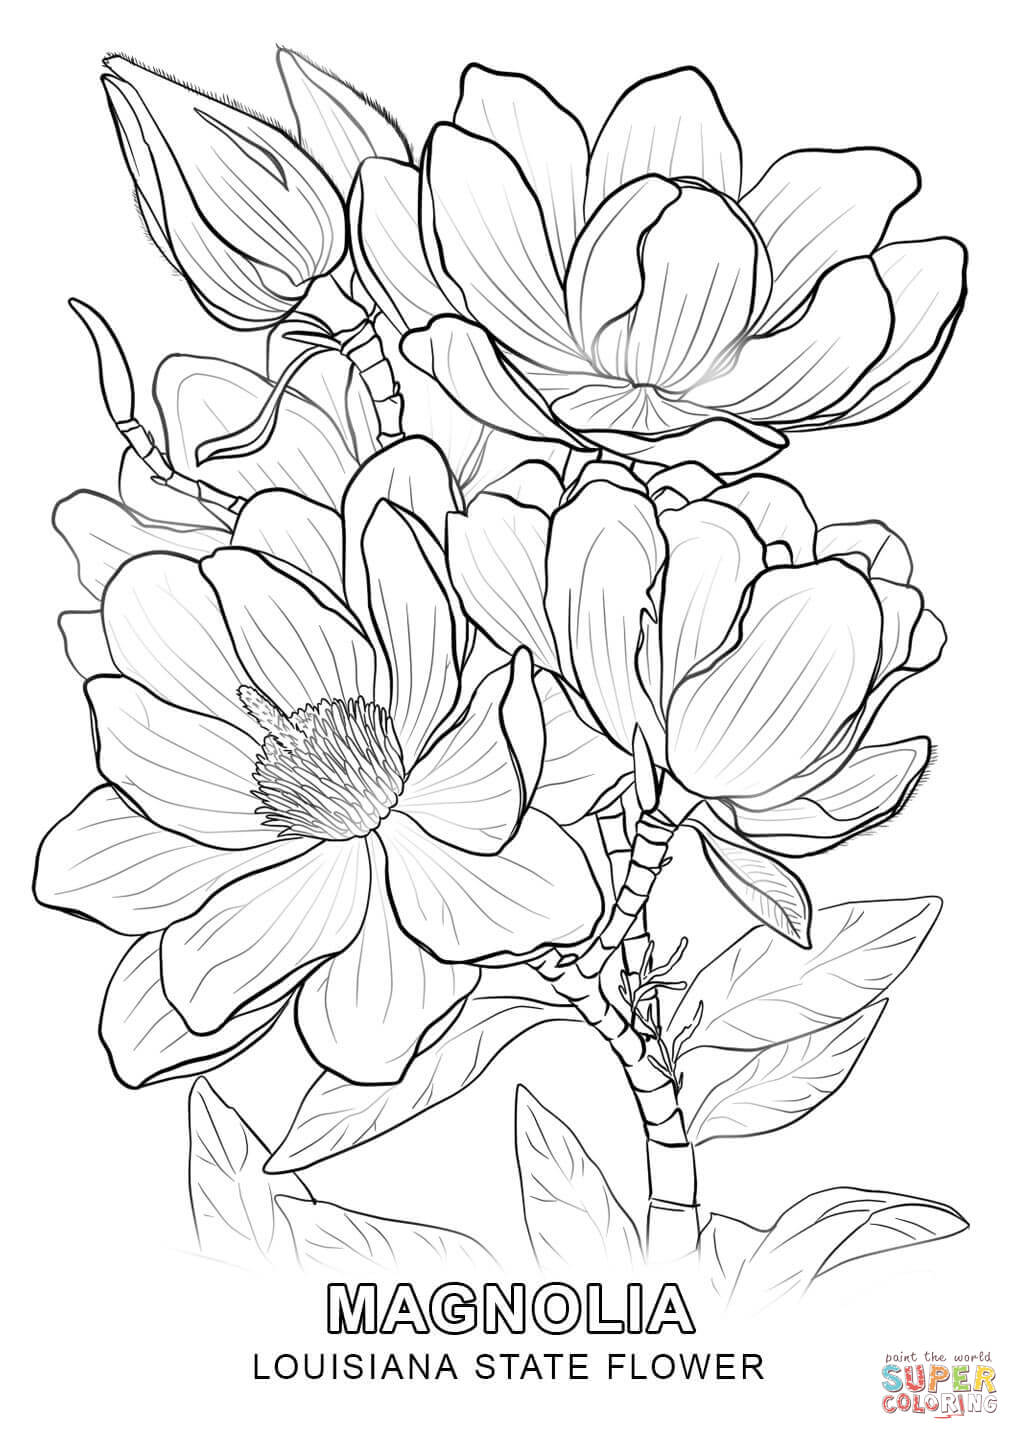 Louisiana State Flower coloring page: Magnolia